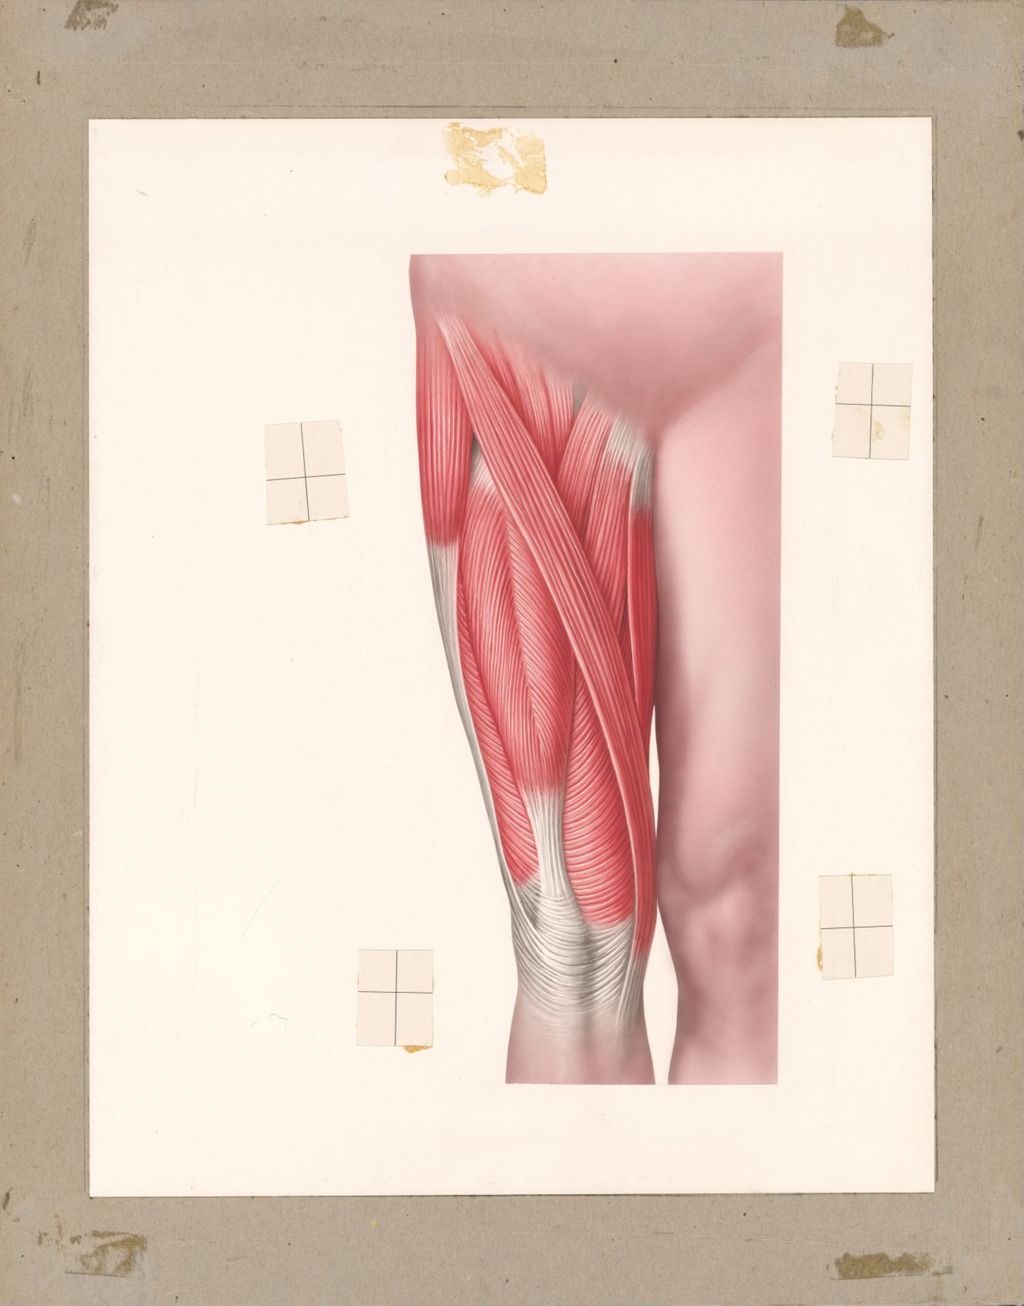 Miniature of Normal Muscles of the arm